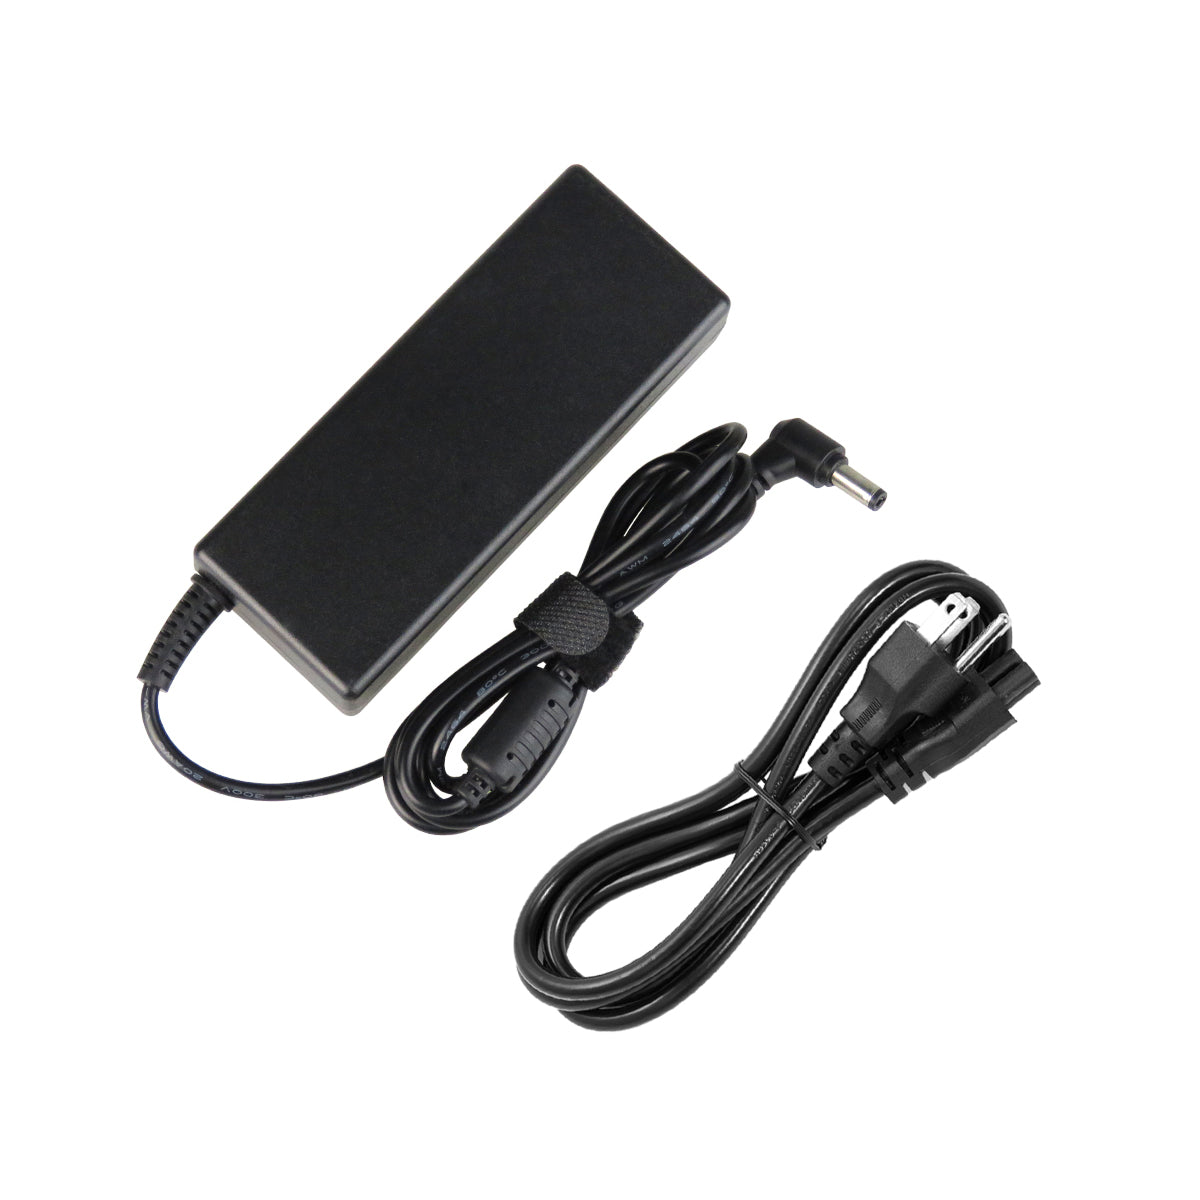 AC Adapter Charger for ASUS X56 Series Notebook.